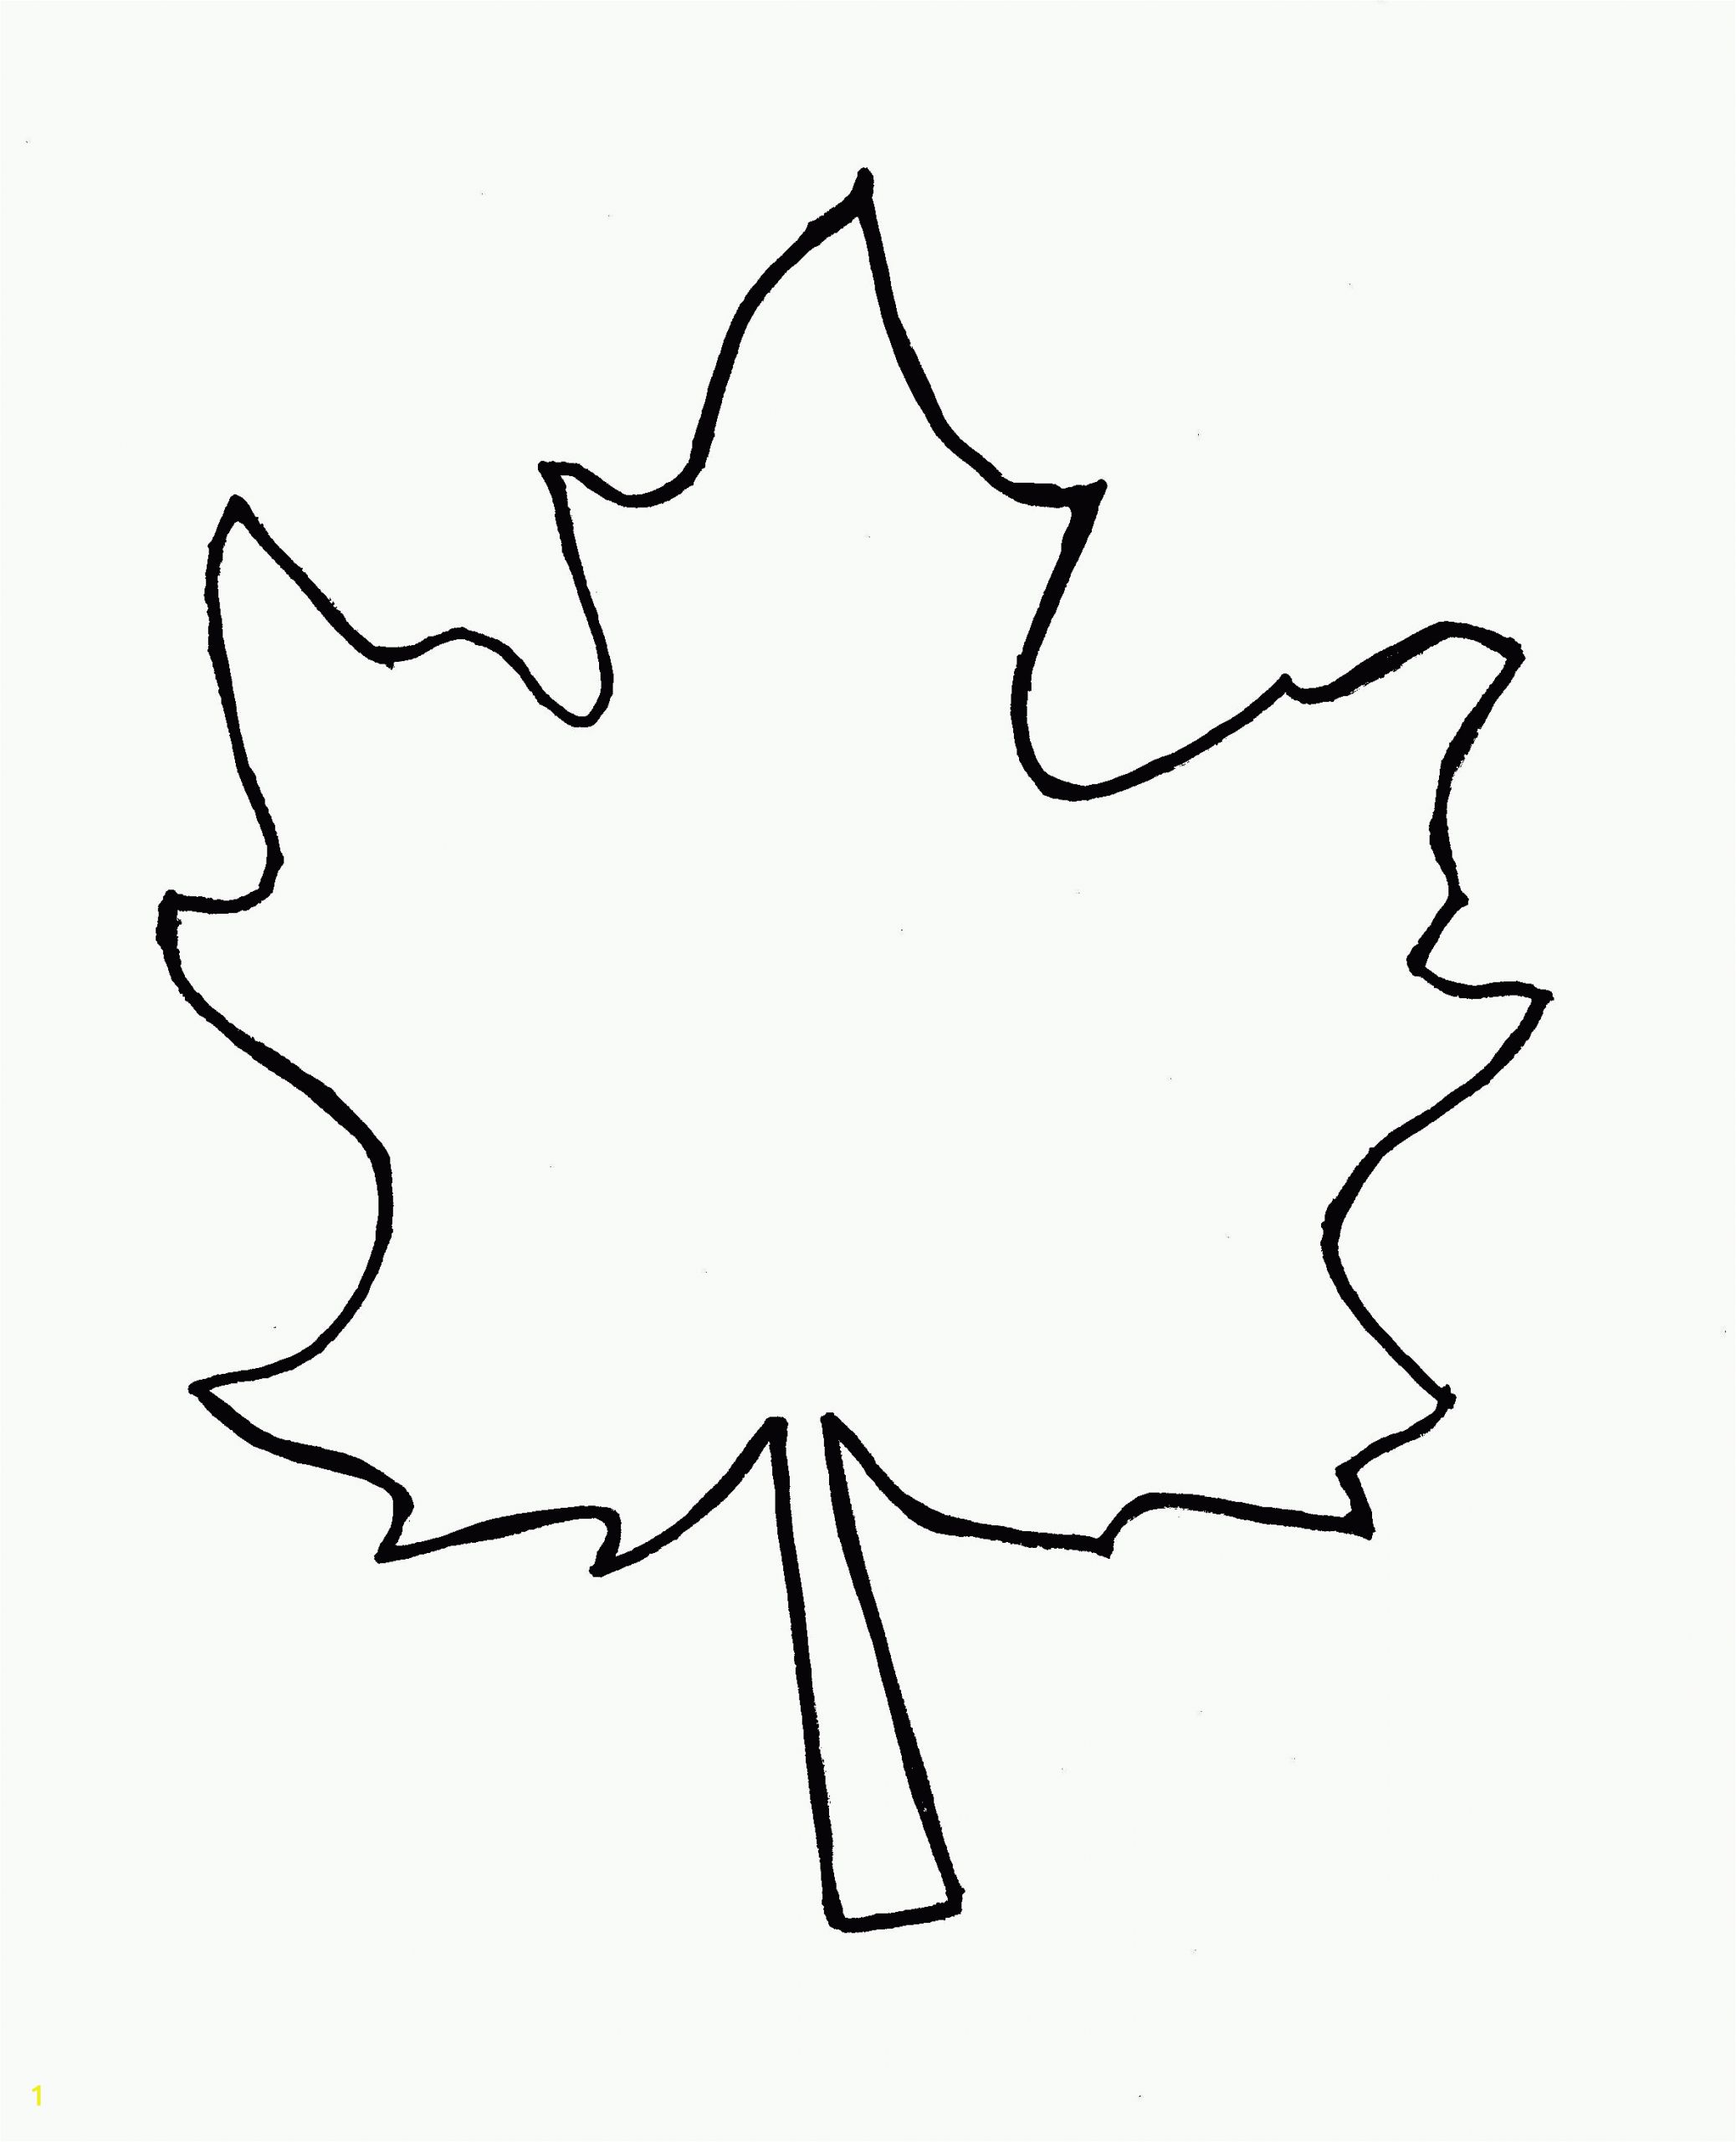 Pumpkin Leaf Coloring Page Sycamore Leaf Template Coloring Page